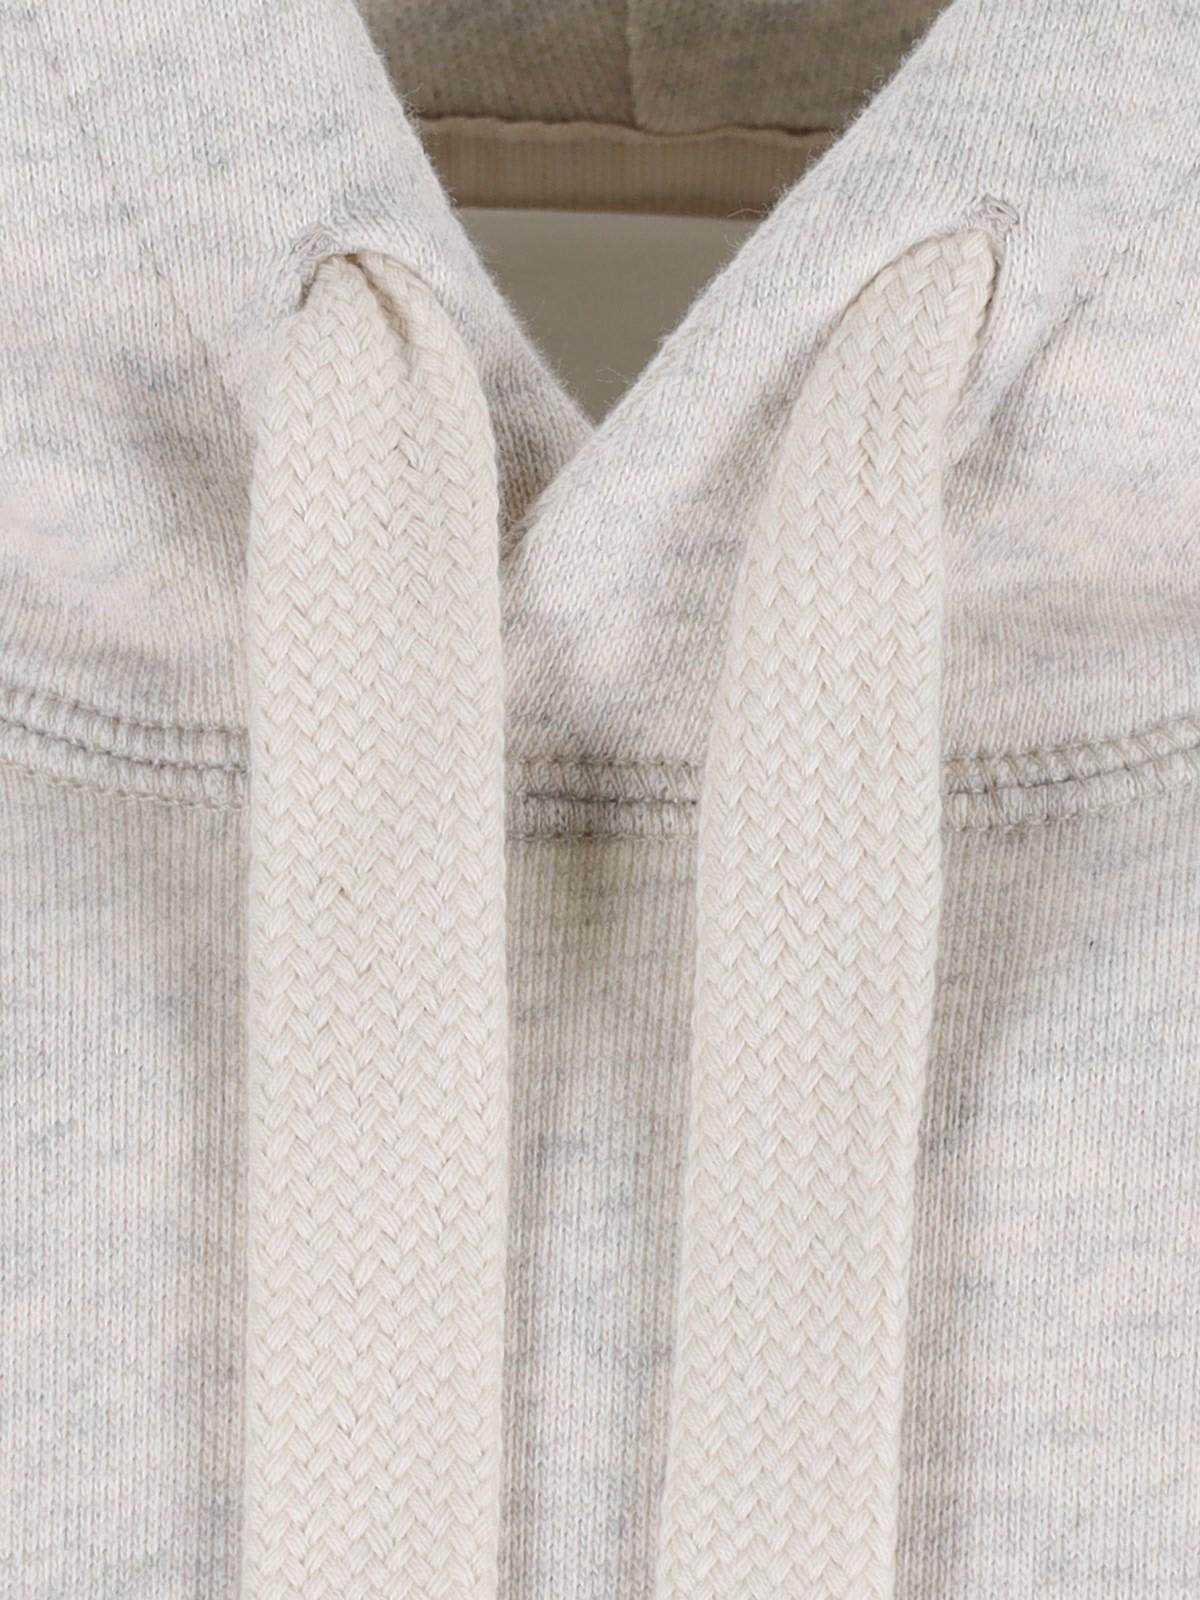 Shop Isabel Marant Marcello Hoodie In Neutrals